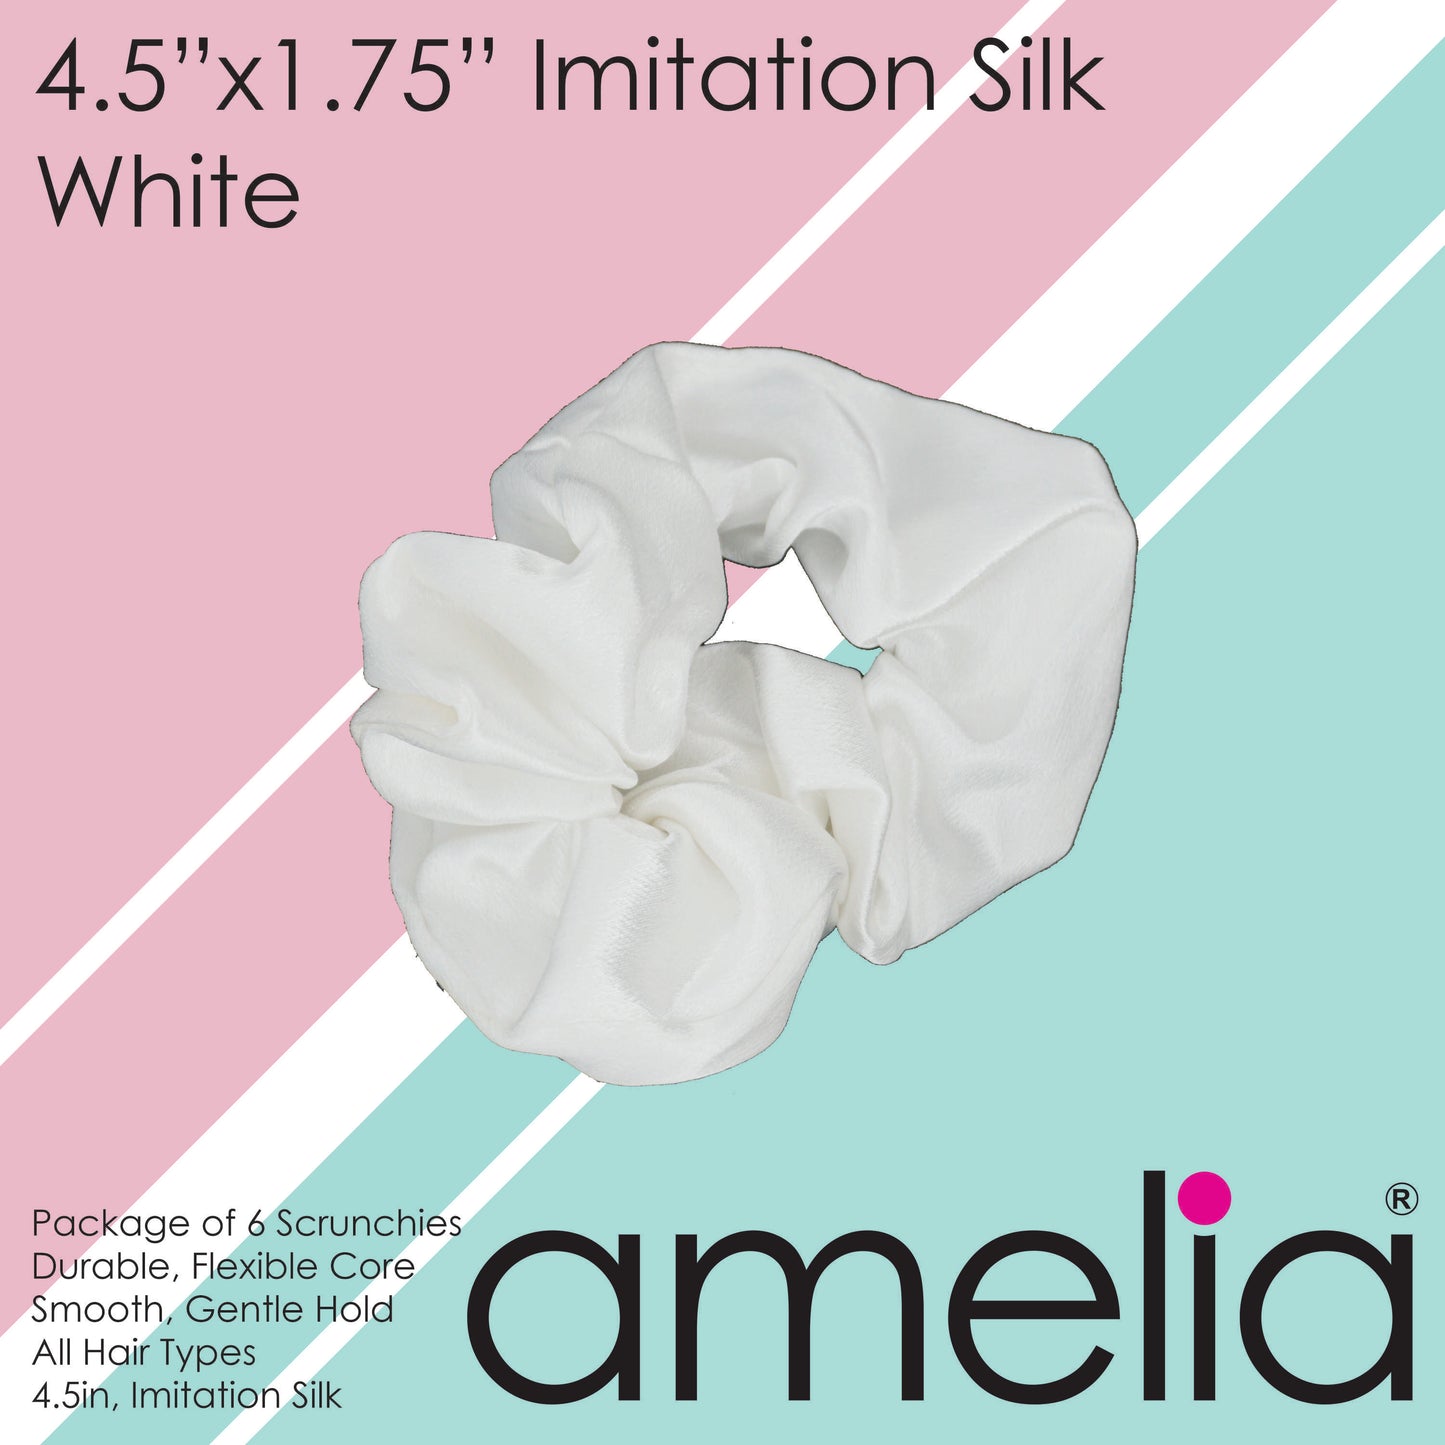 Amelia Beauty, White Imitation Silk Scrunchies, 4.5in Diameter, Gentle on Hair, Strong Hold, No Snag, No Dents or Creases. 6 Pack